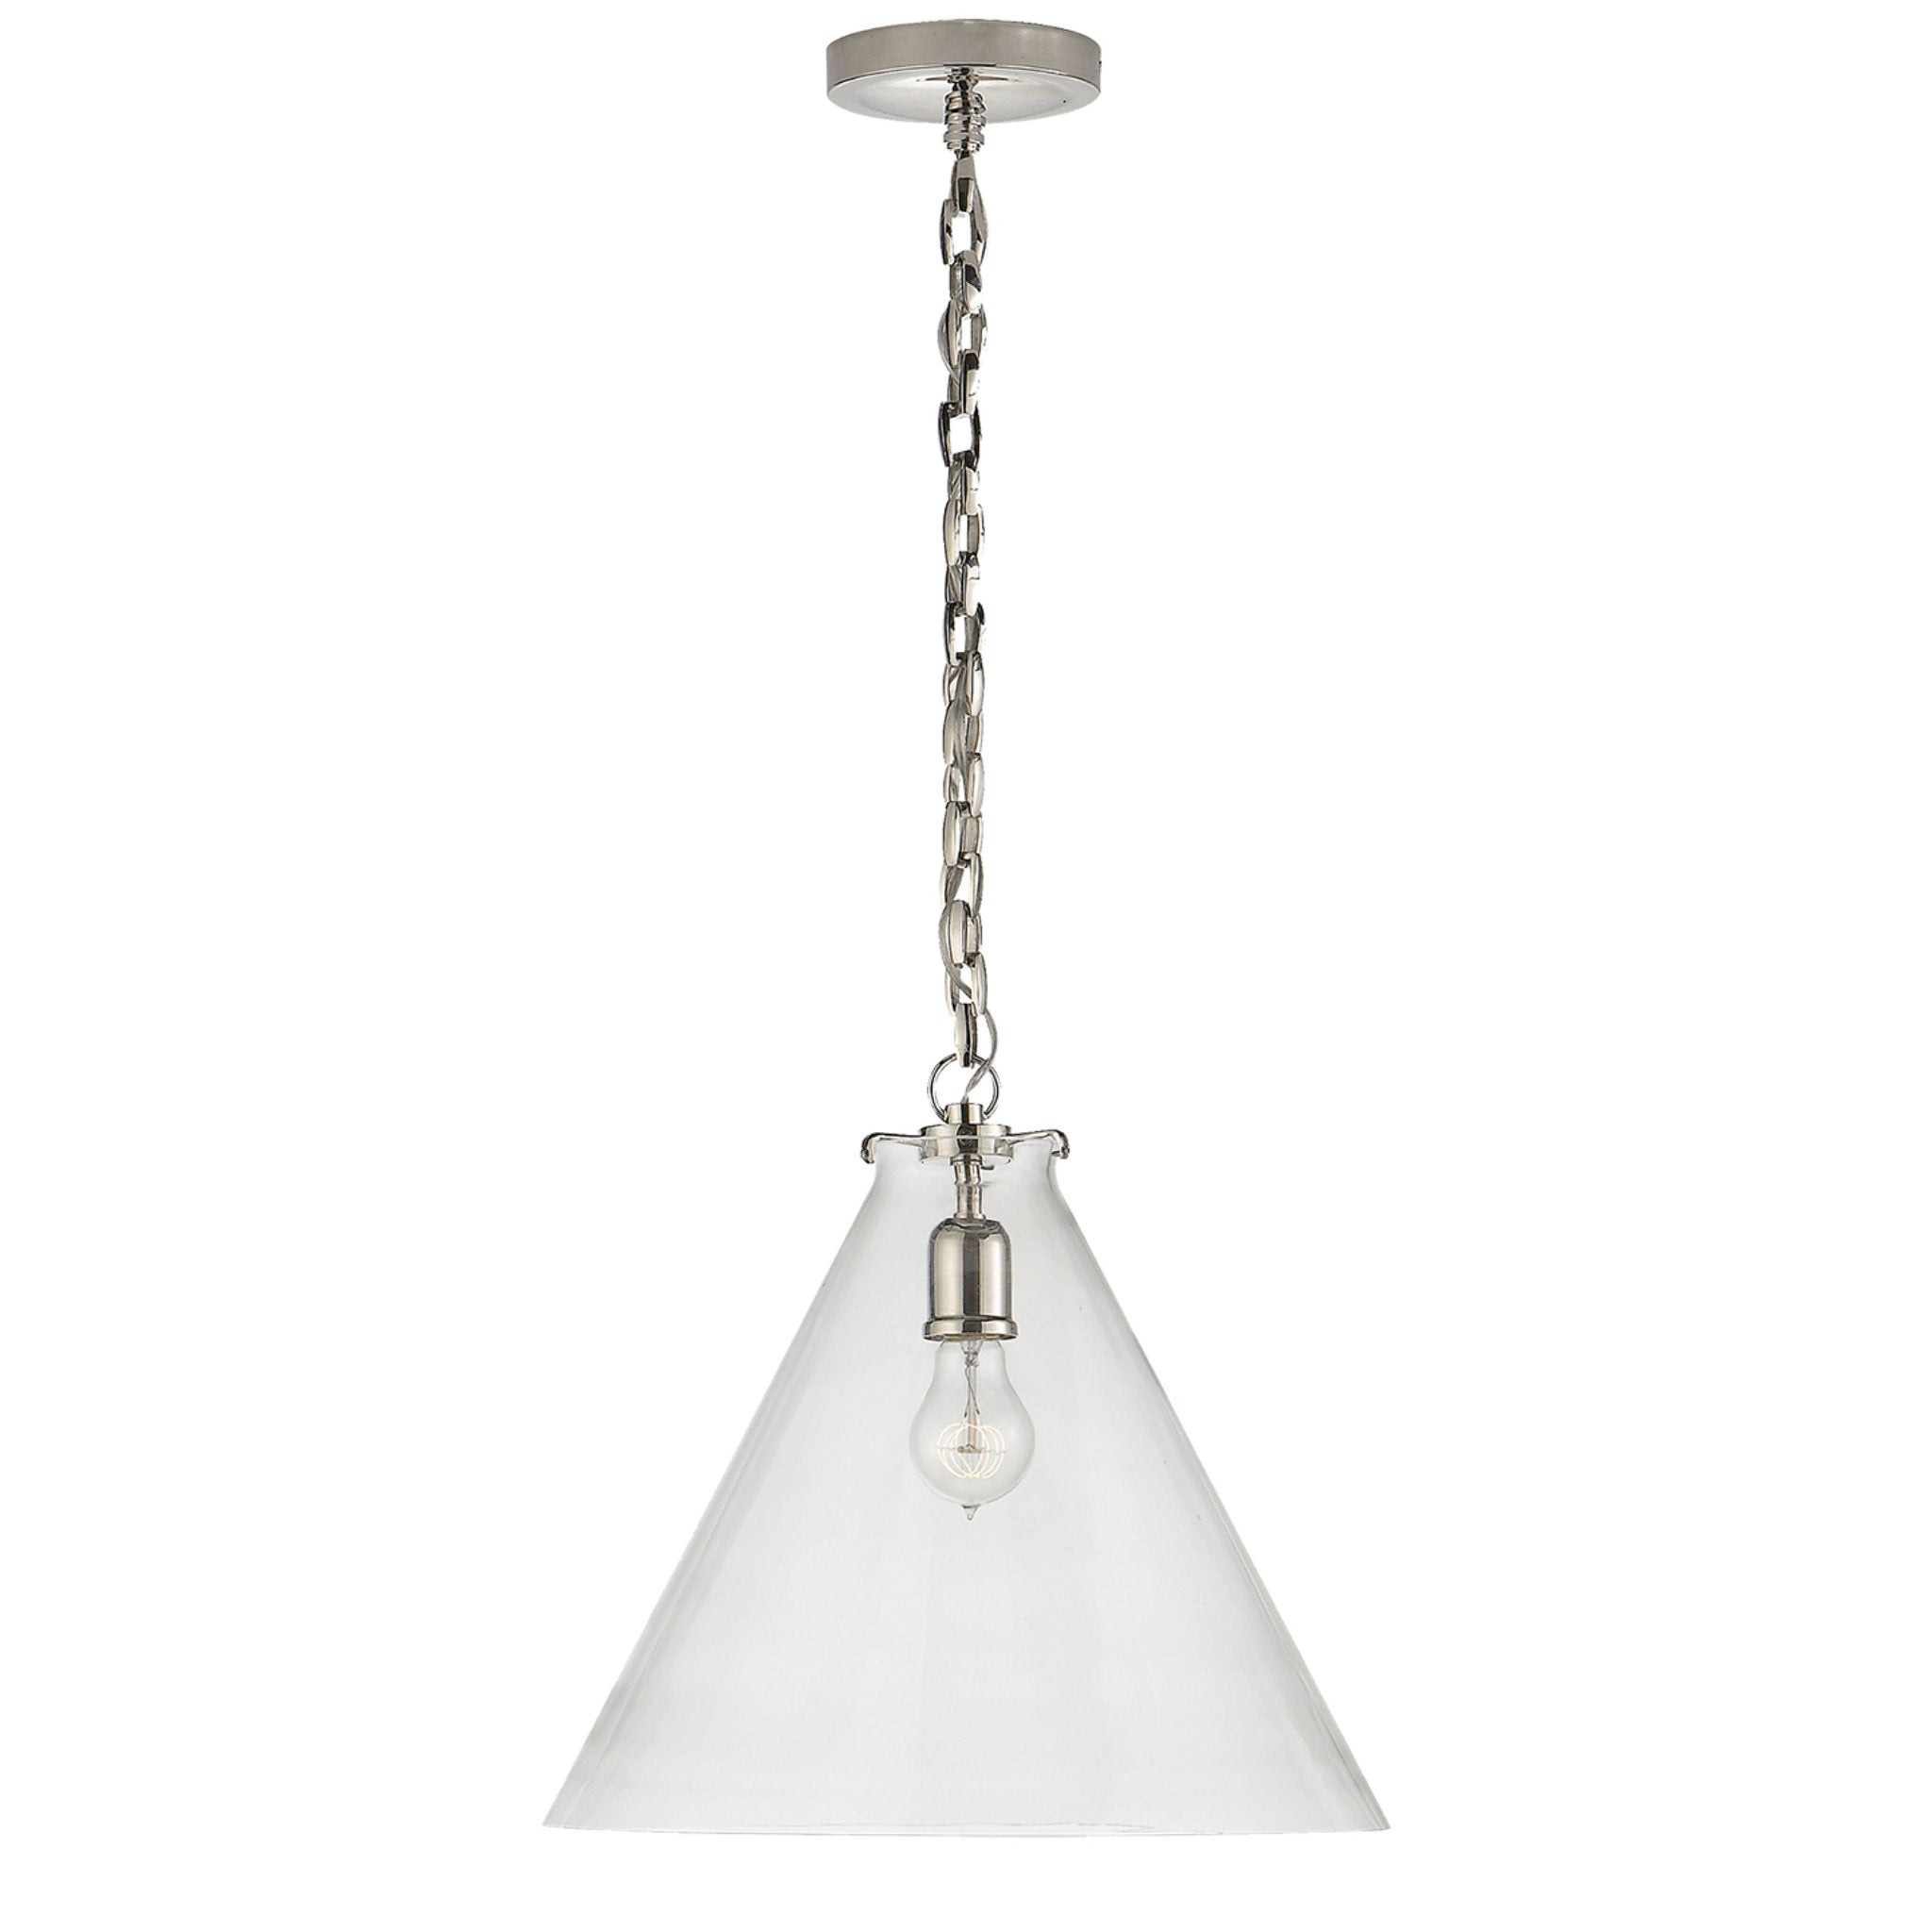 Thomas O'Brien Katie Conical Pendant in Polished Nickel with Clear Glass